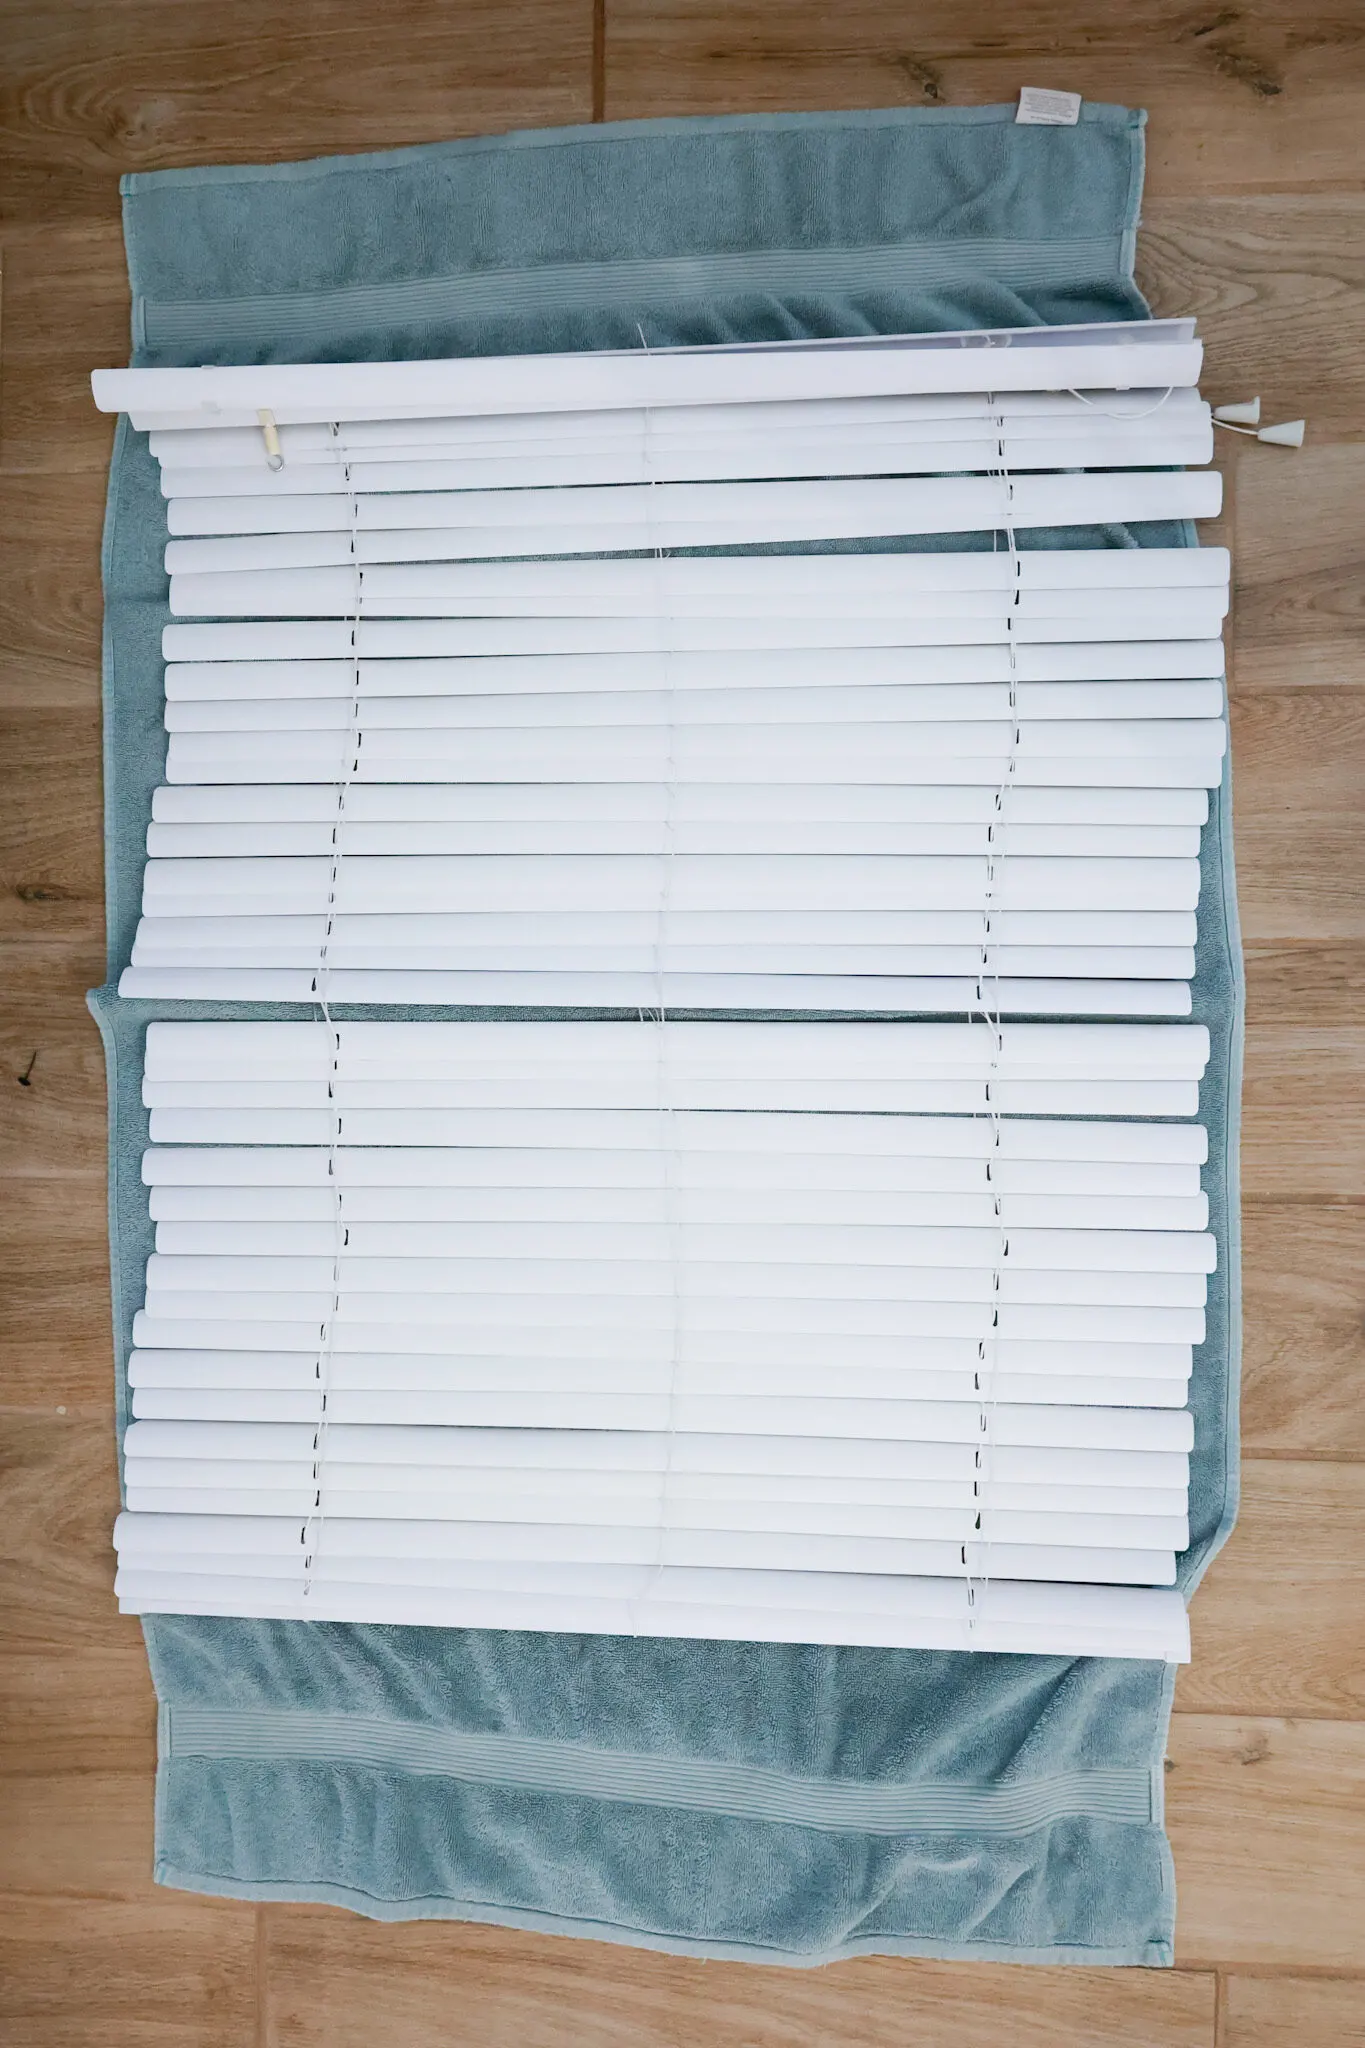 cleaned blinds laid on towel to air dry